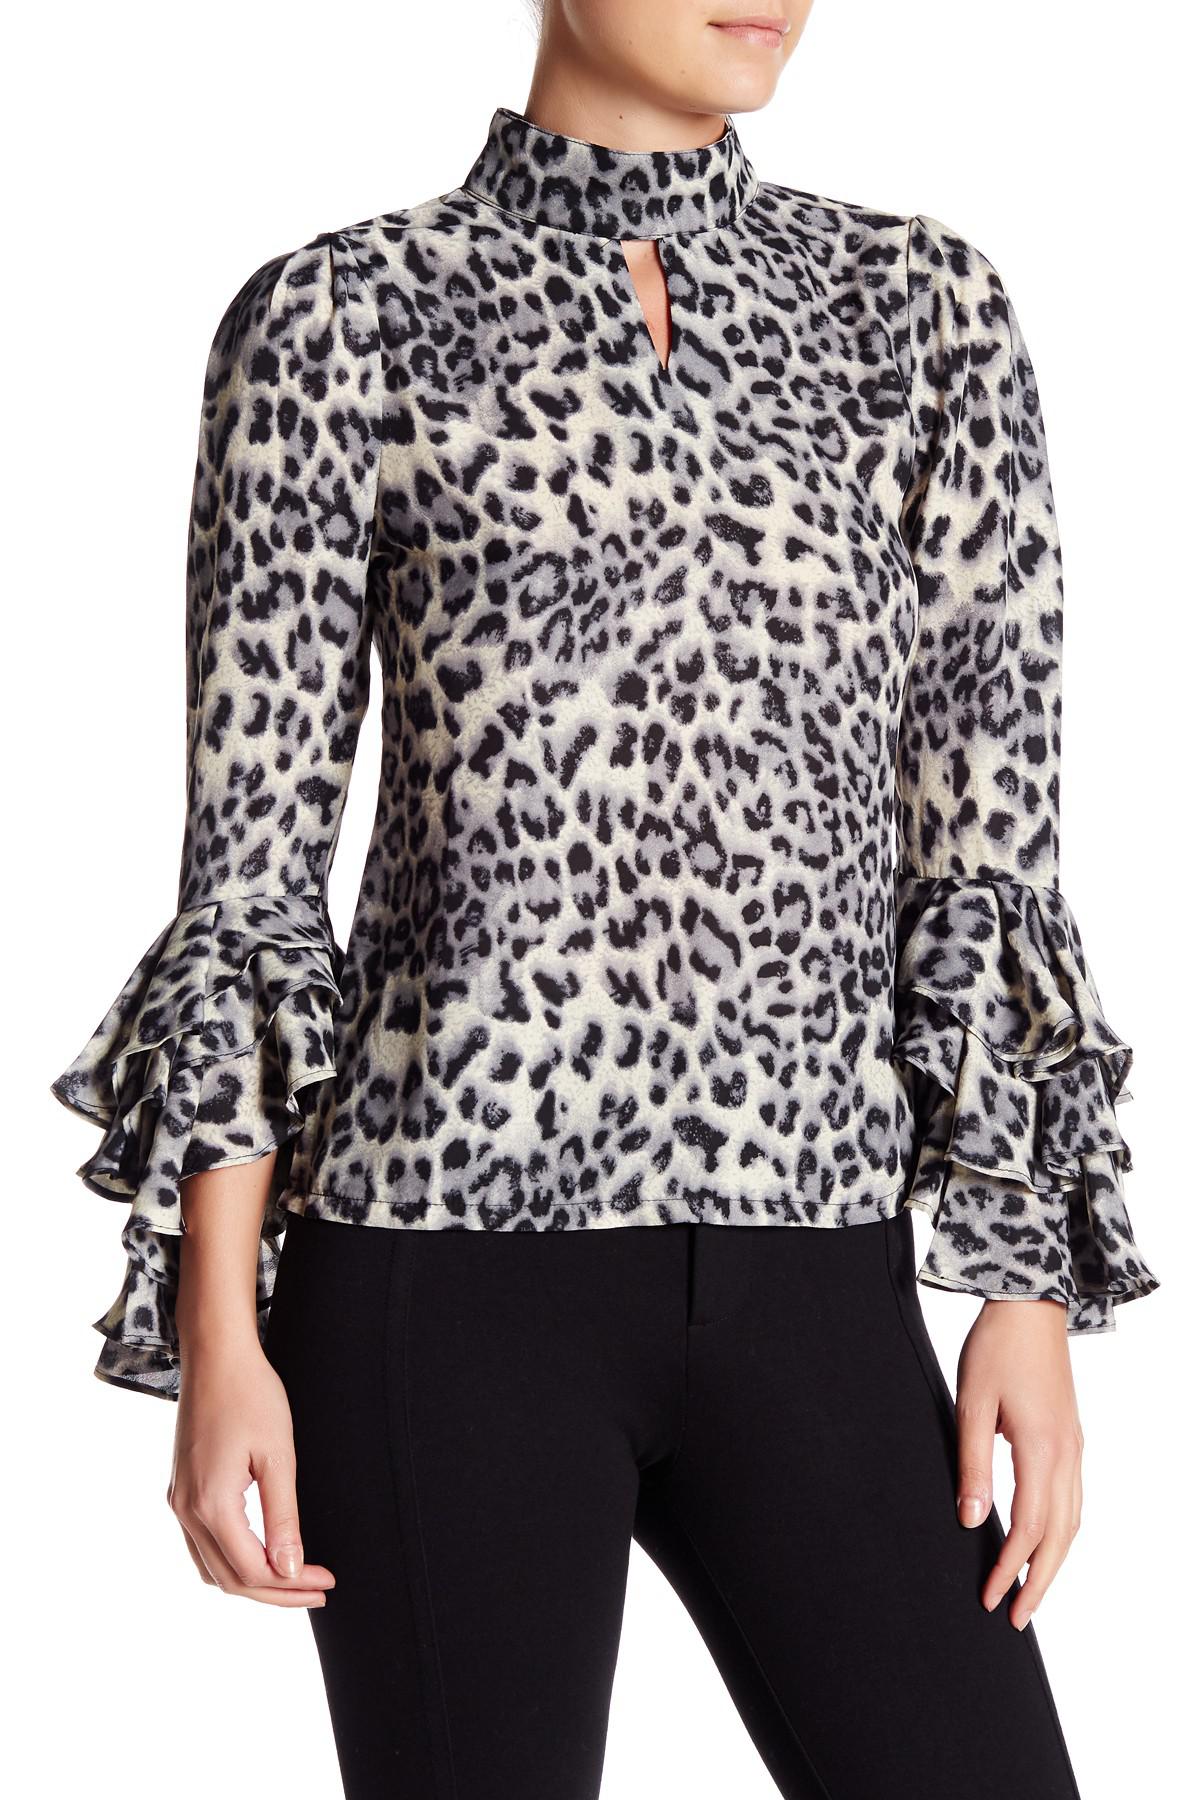 Gracia Synthetic Leopard Print Ruffle Sleeve Blouse in Grey (Gray) - Lyst